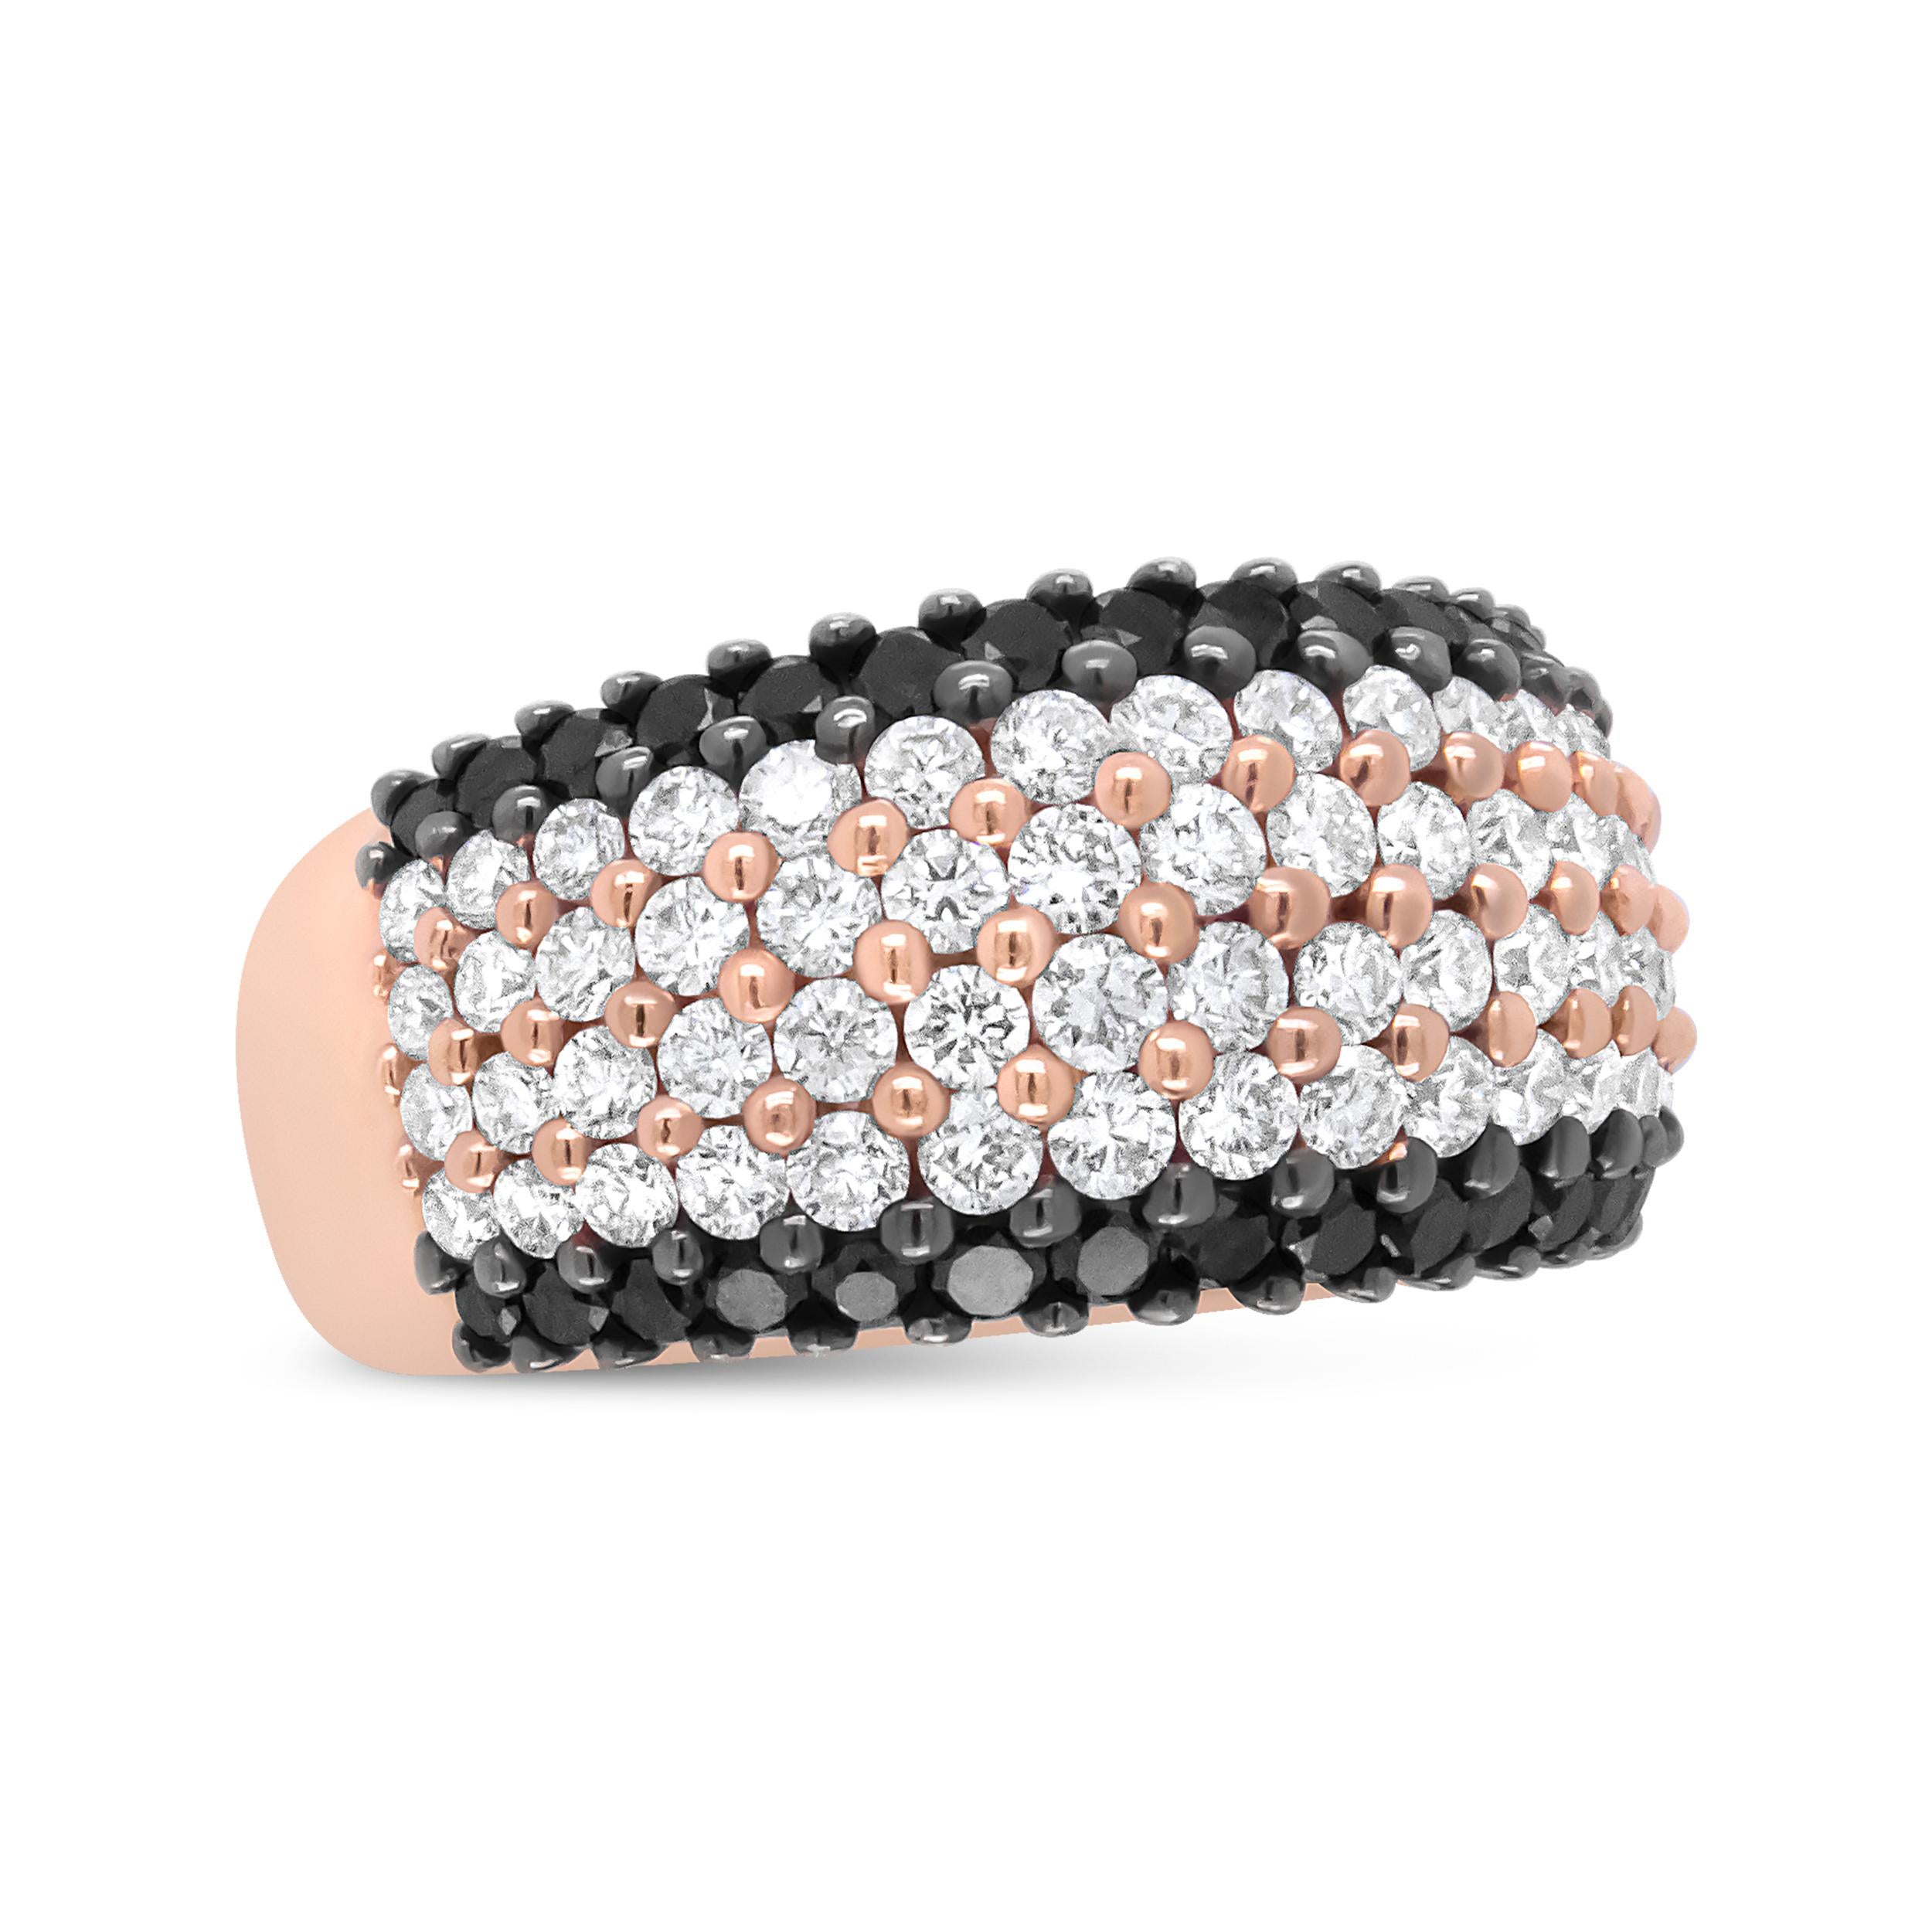 Pops of rose gold dance delicately across this black and white colored piece. The 18k rose gold band has 4 central rows of natural white diamonds flanked by a row of treated black diamonds on either side. The round-cut white diamonds are embellished